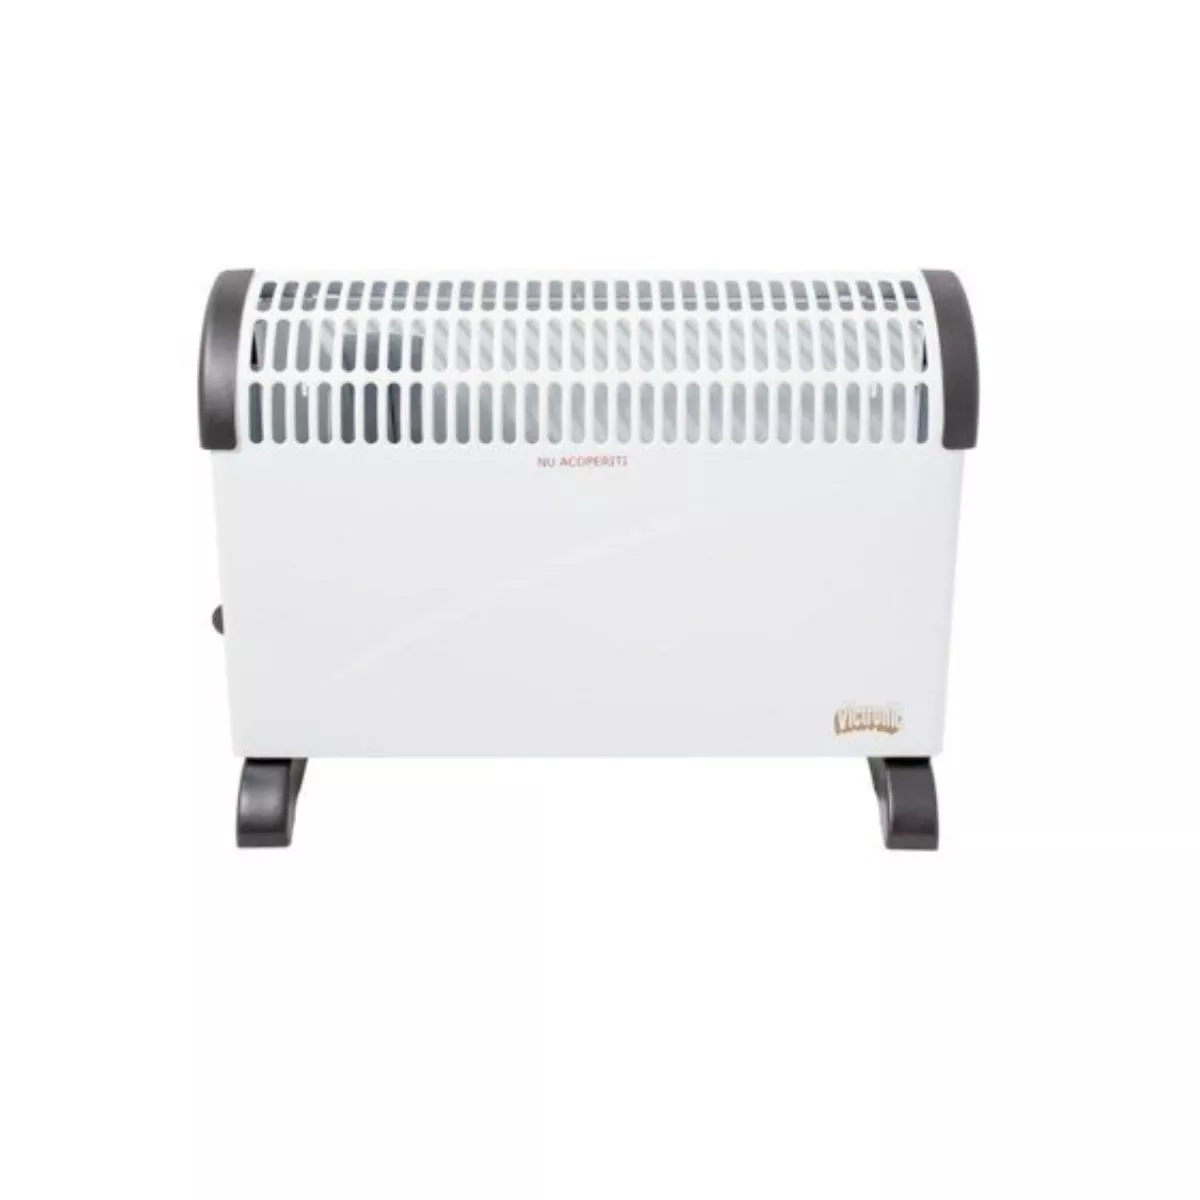 Convector electric 2000w, Victronic 1